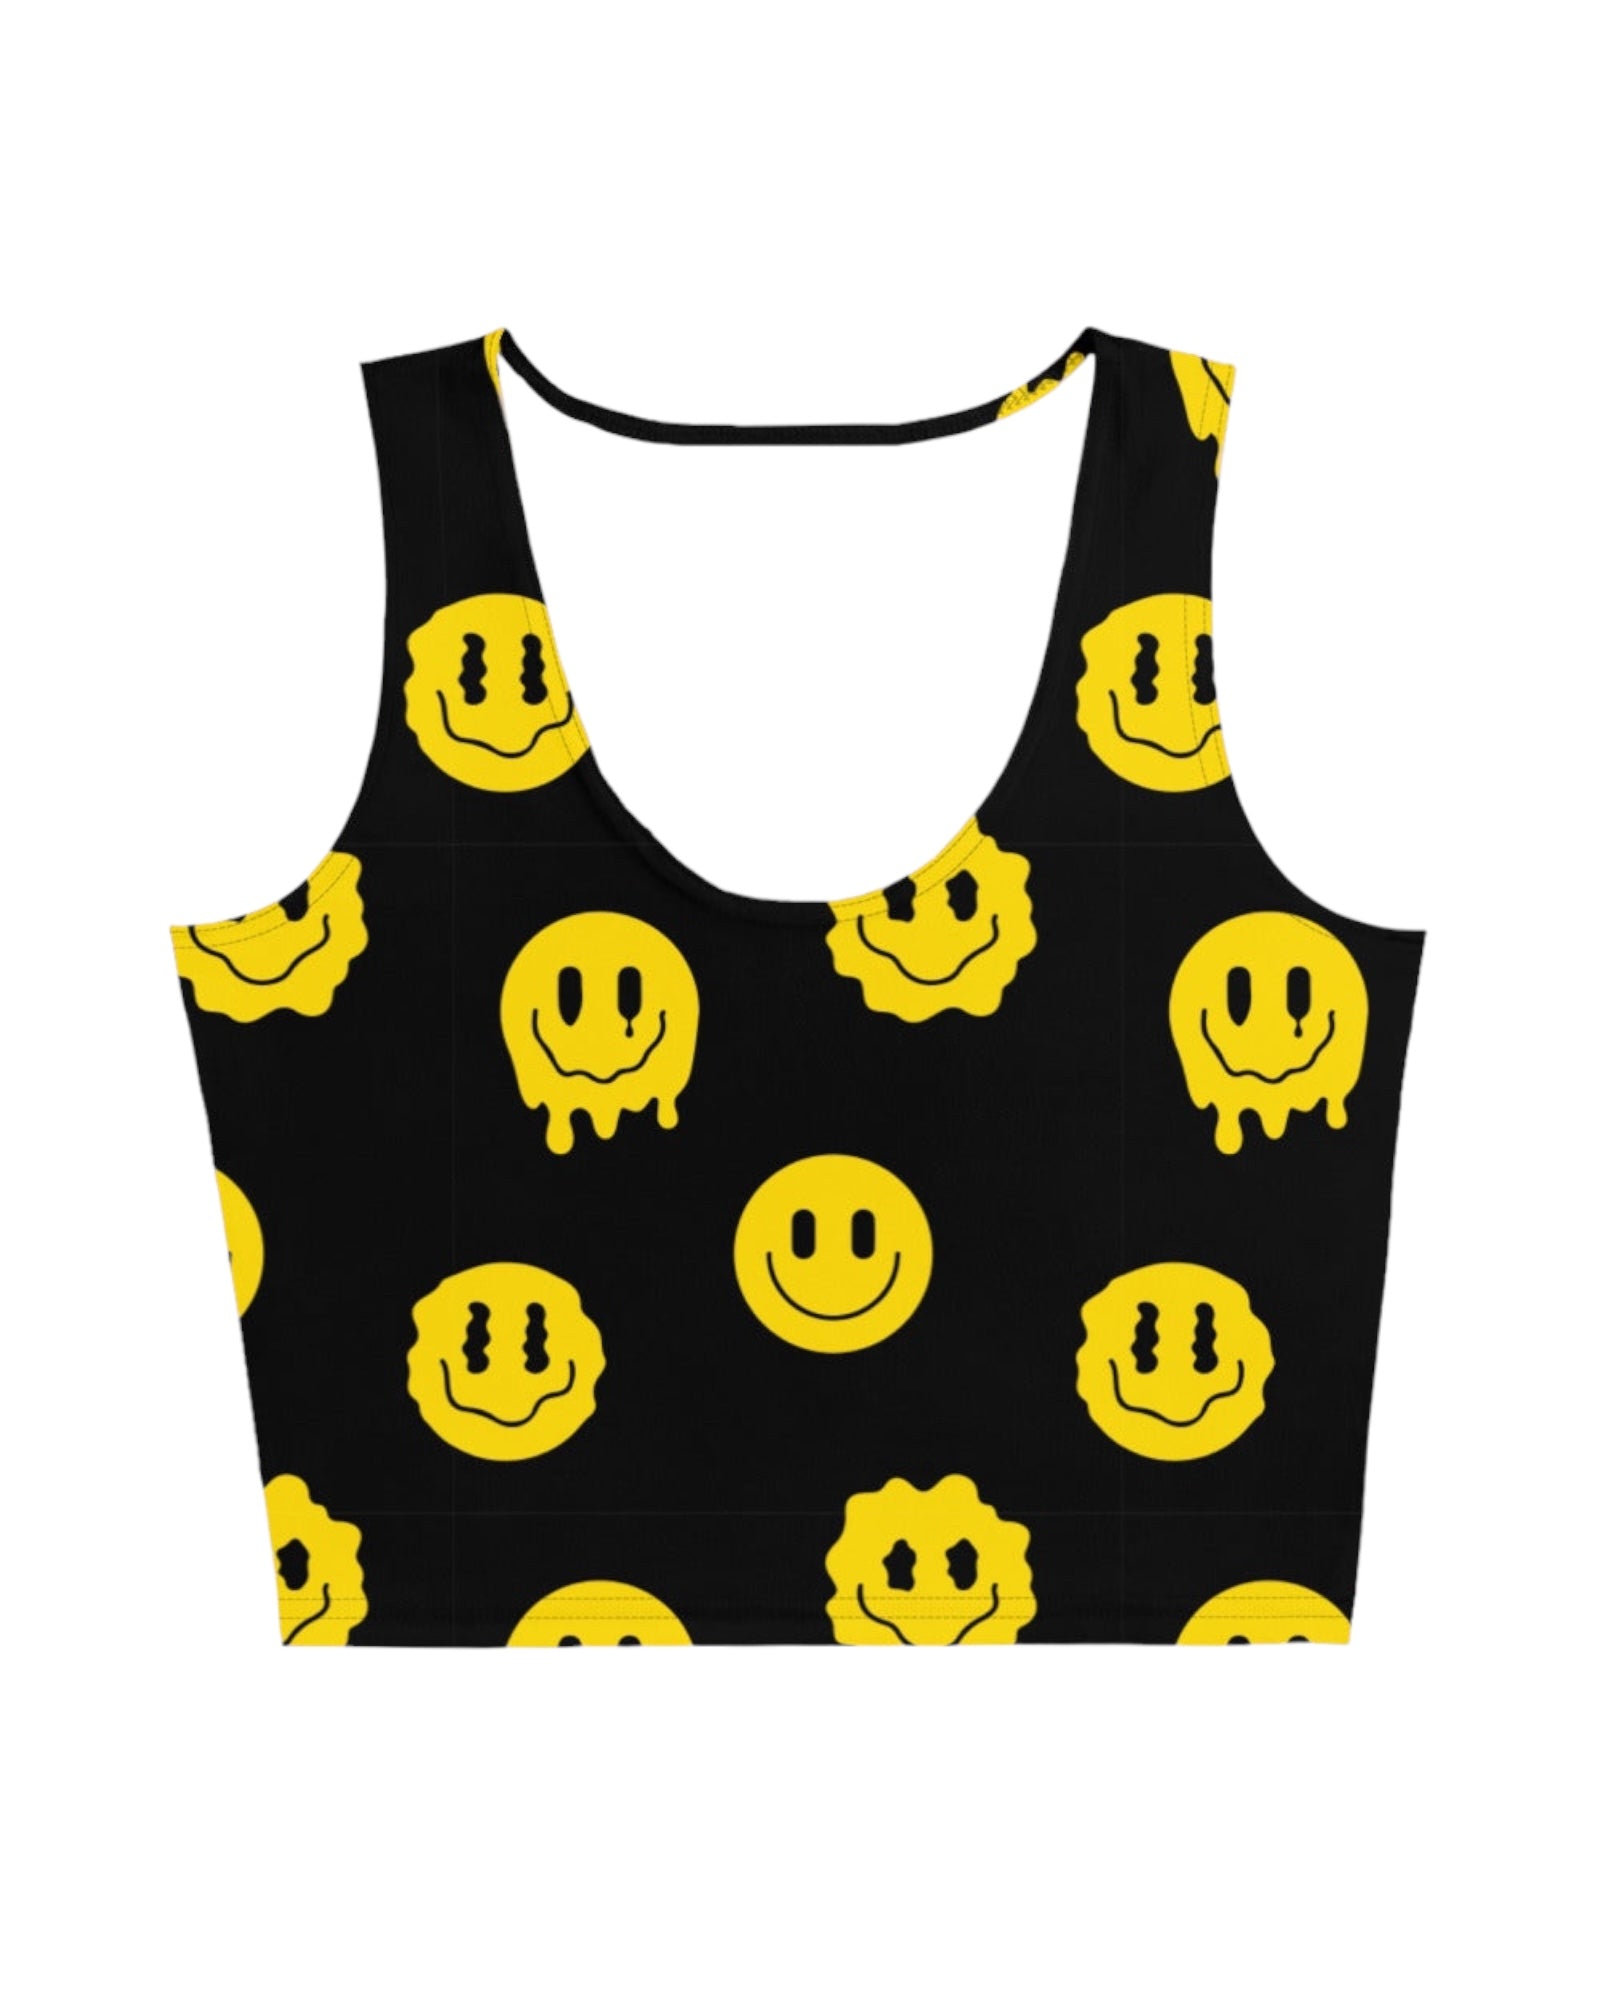 Front view of Trippie Crop Top model - Displaying the front design of the crop top with yellow smiley faces, perfect for a black and yellow rave outfit.